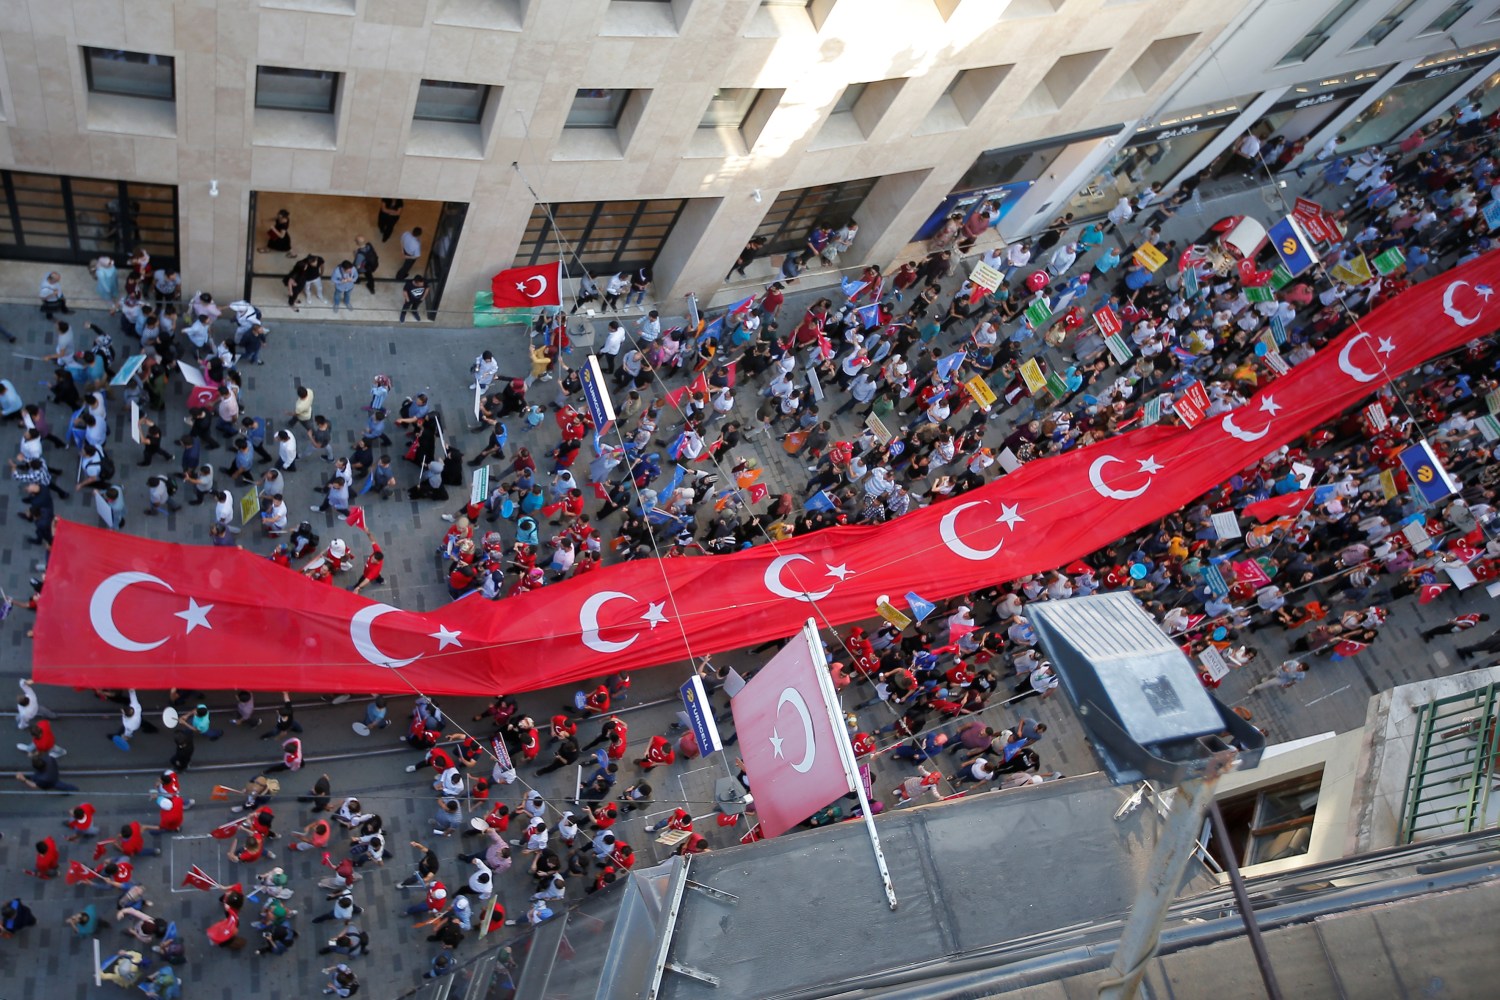 Supporters of Turkish President Tayyip Erdogan carry a huge Turkish flag during a pre-election gathering in Istanbul, Turkey, June 20, 2018. REUTERS/Huseyin Aldemir - RC194386C110